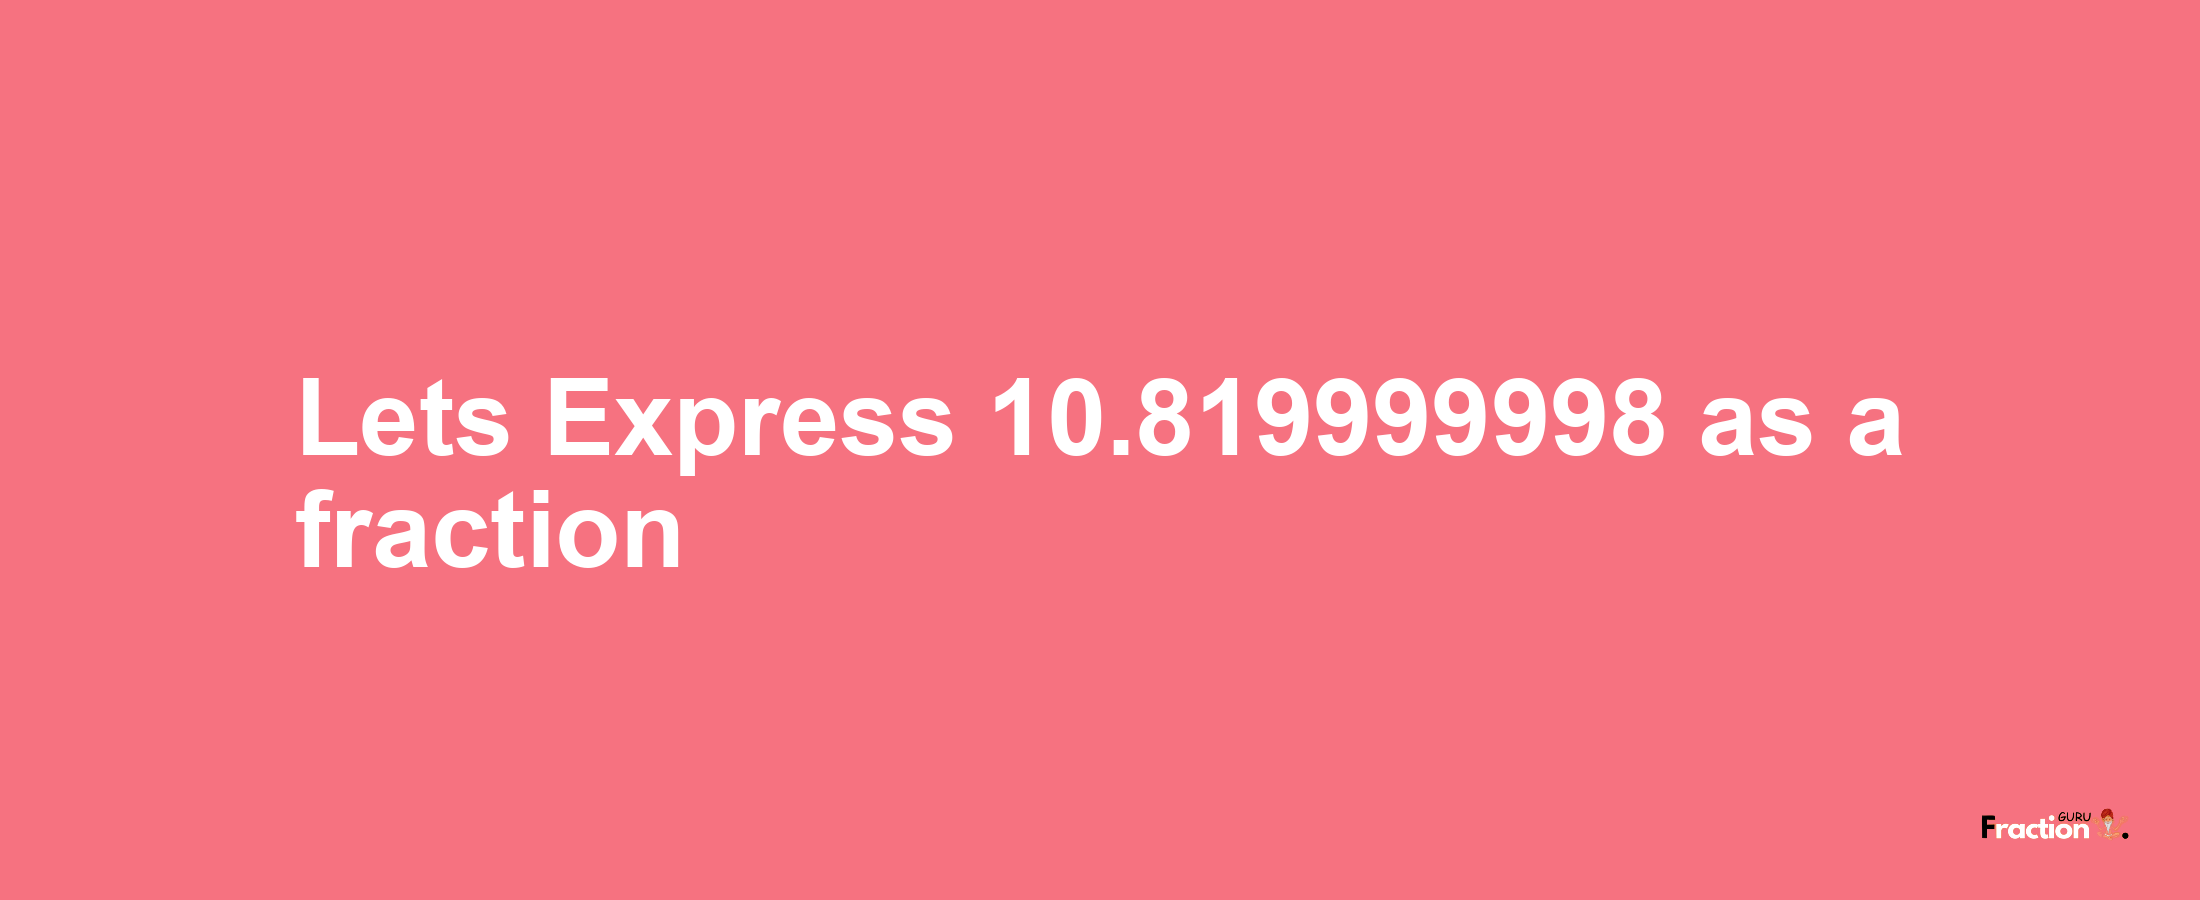 Lets Express 10.819999998 as afraction